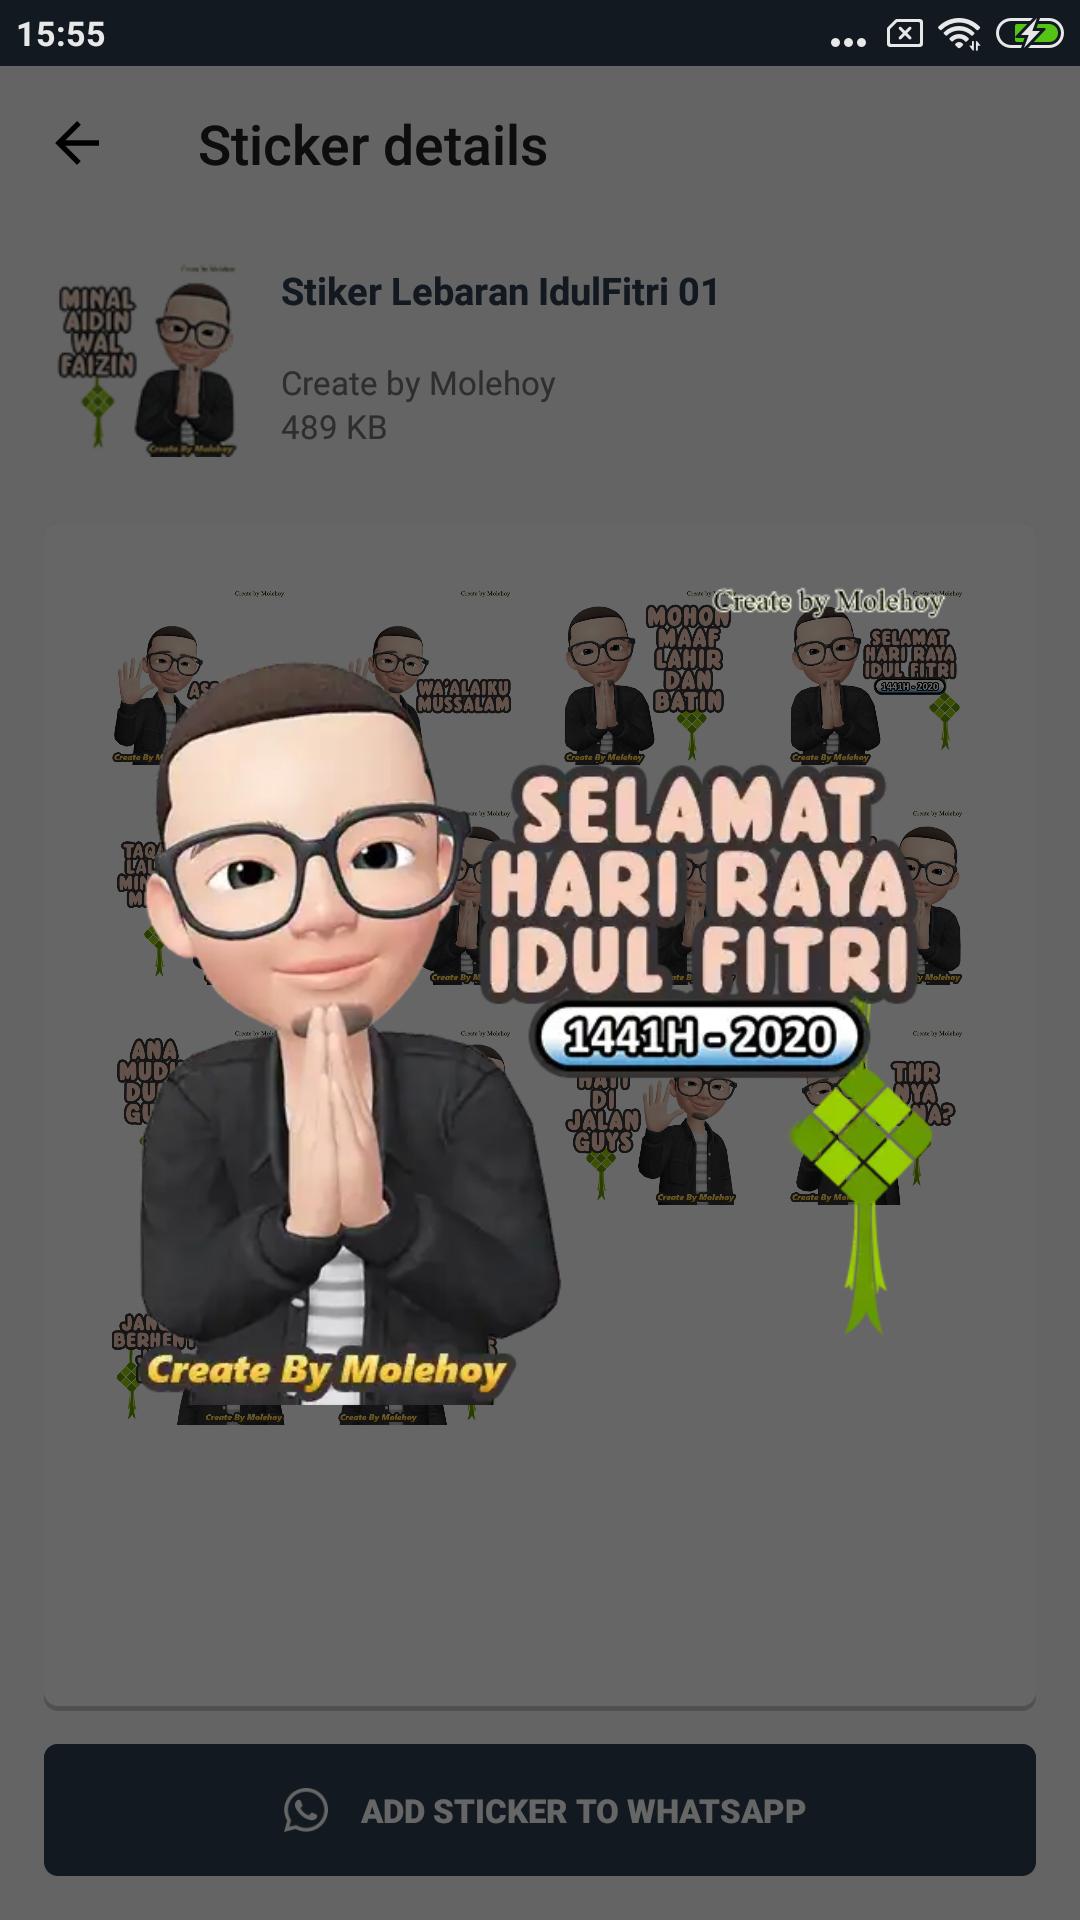 Stiker Lebaran Idul Fitri 2020 For Android Apk Download